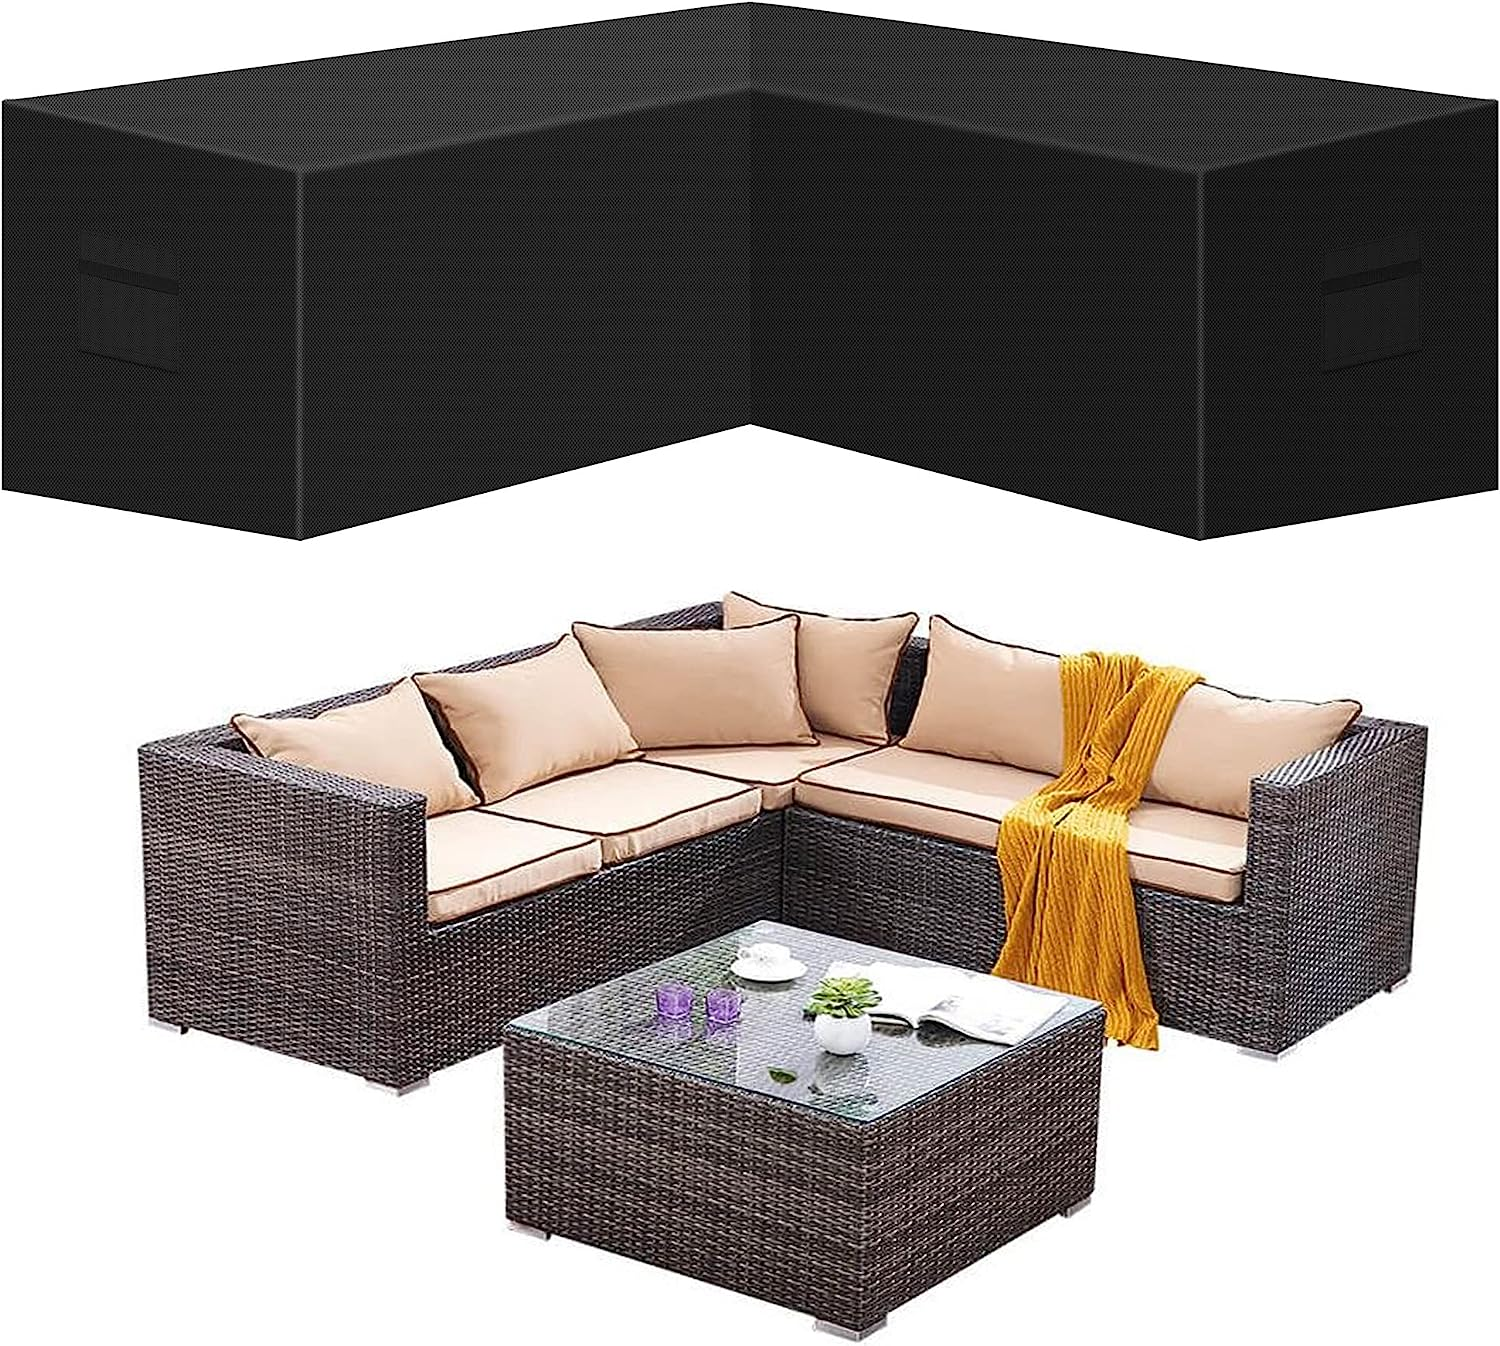 Outdoor V Shaped Sectional Sofa Cover Patio Sectional Furniture Set Covers 